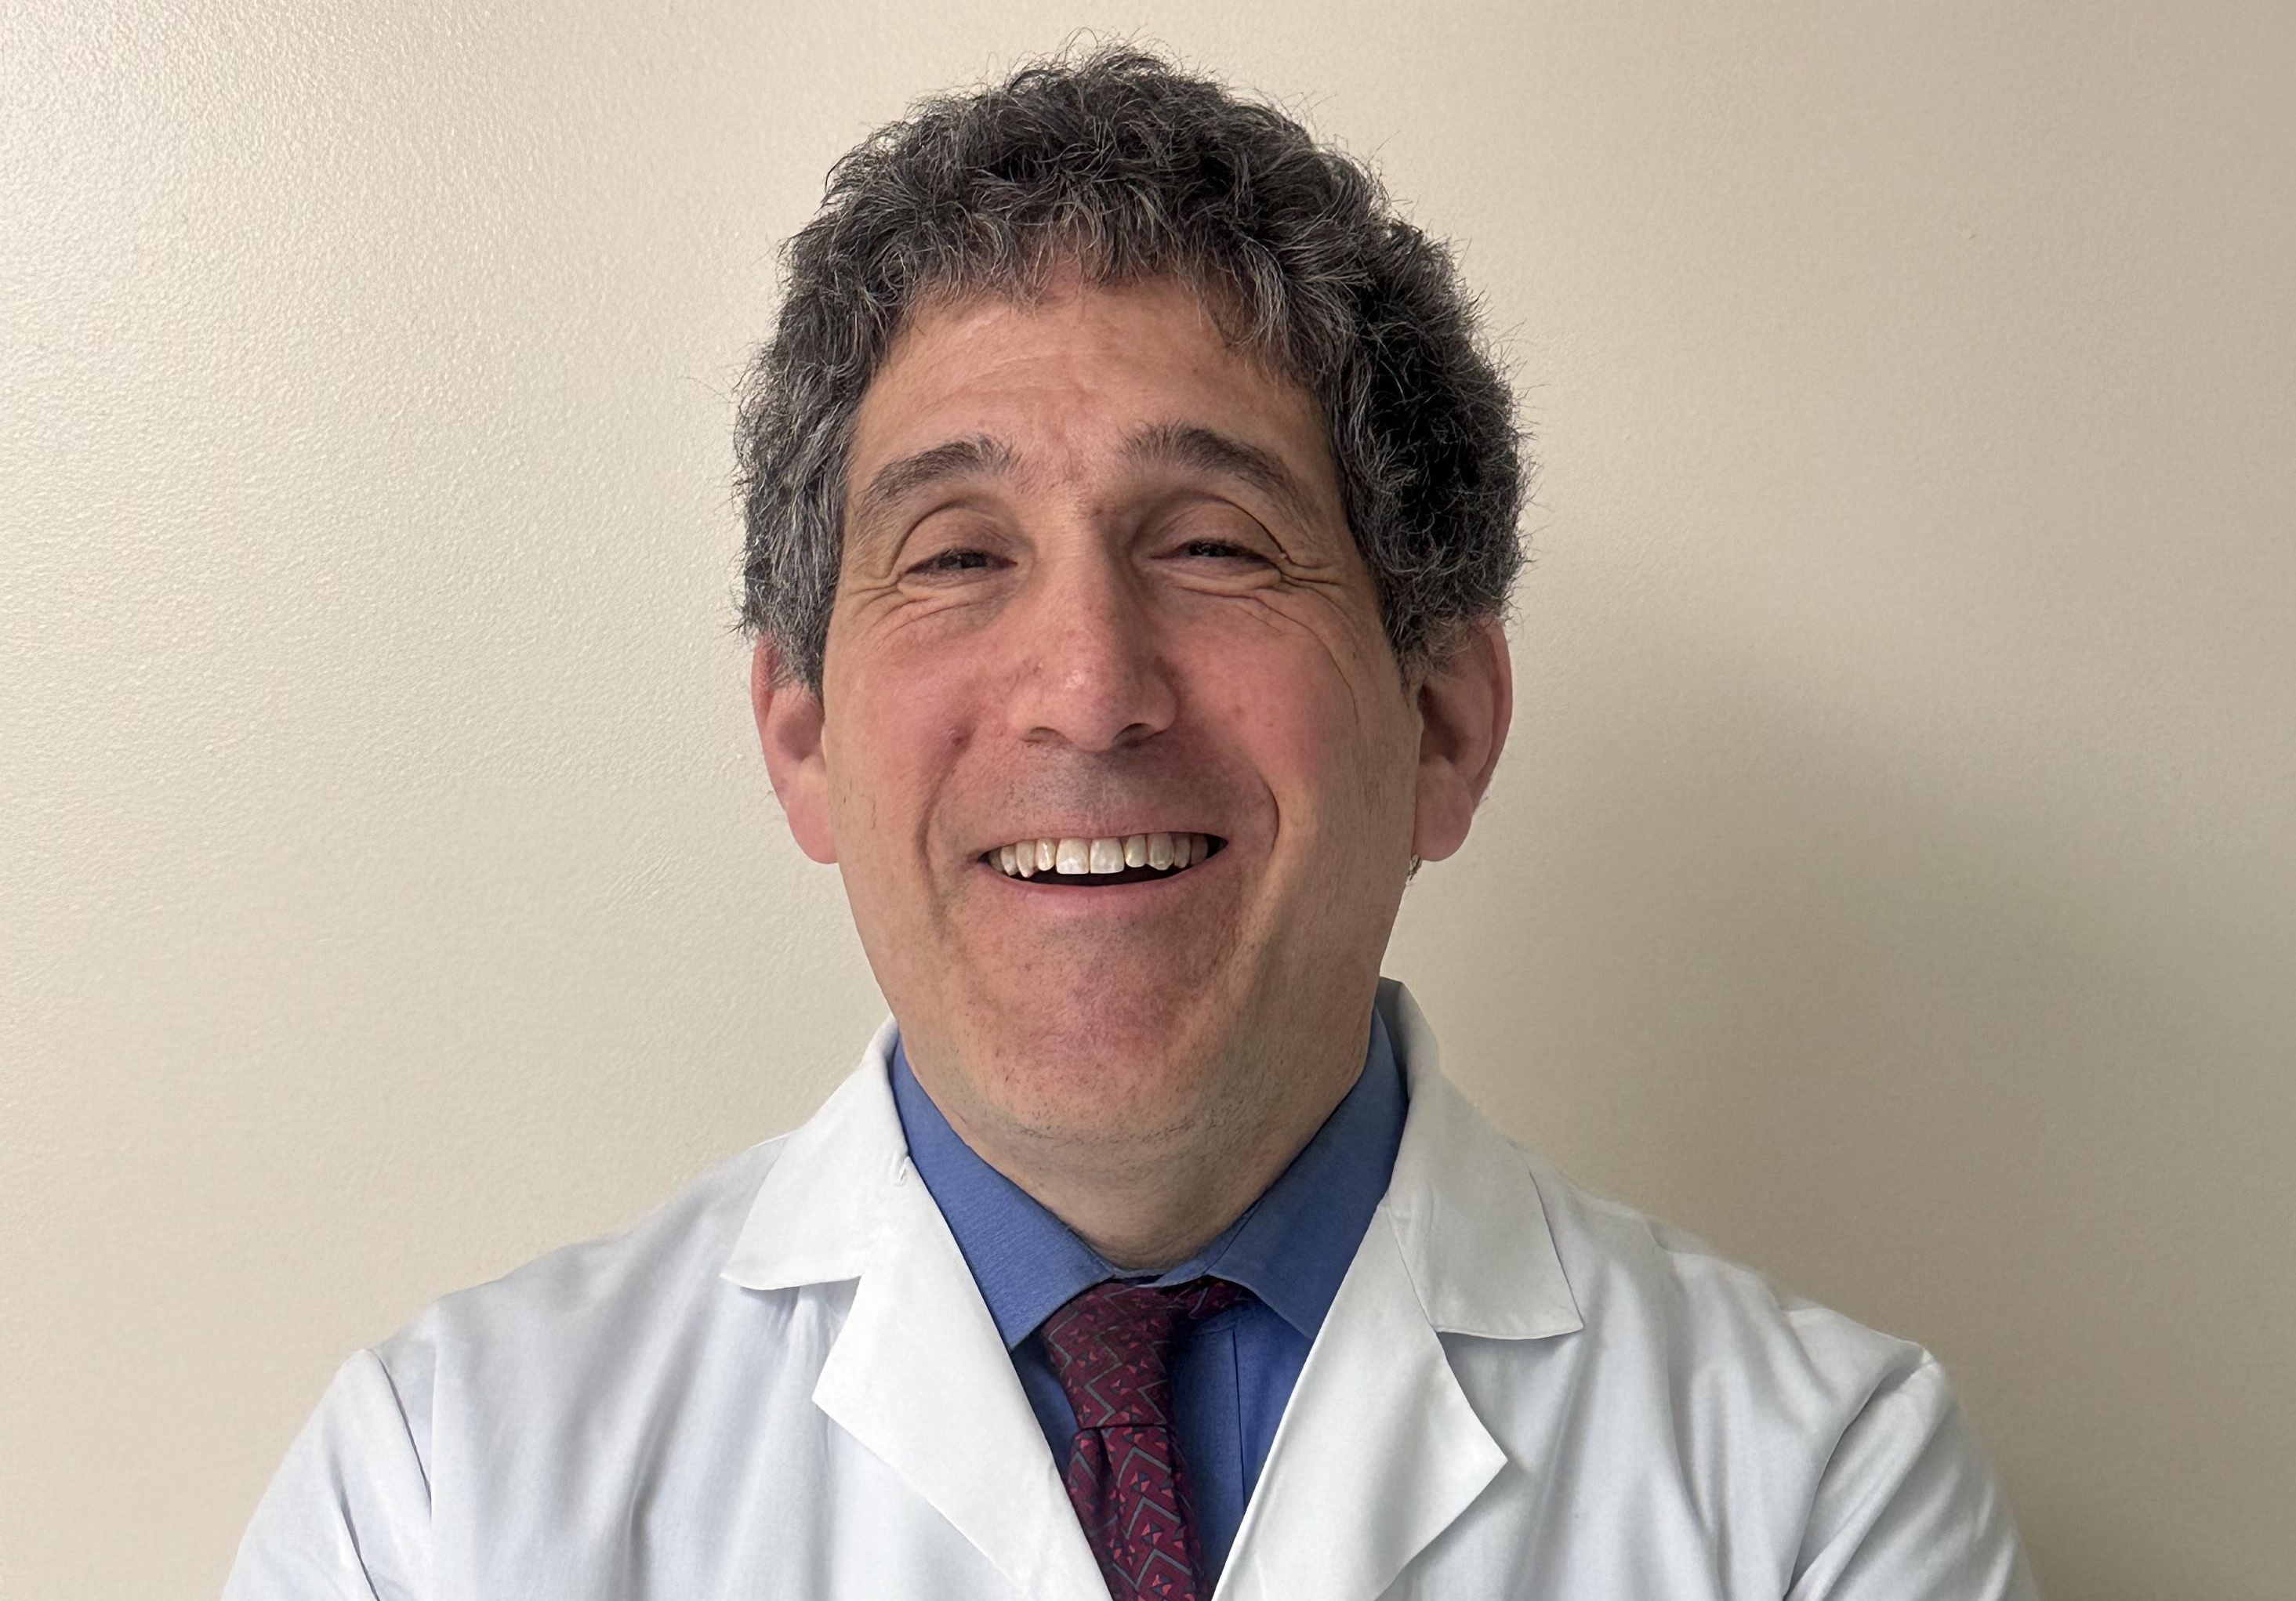 Eric Altschuler, M.D., in a white coat and dress shirt smiling